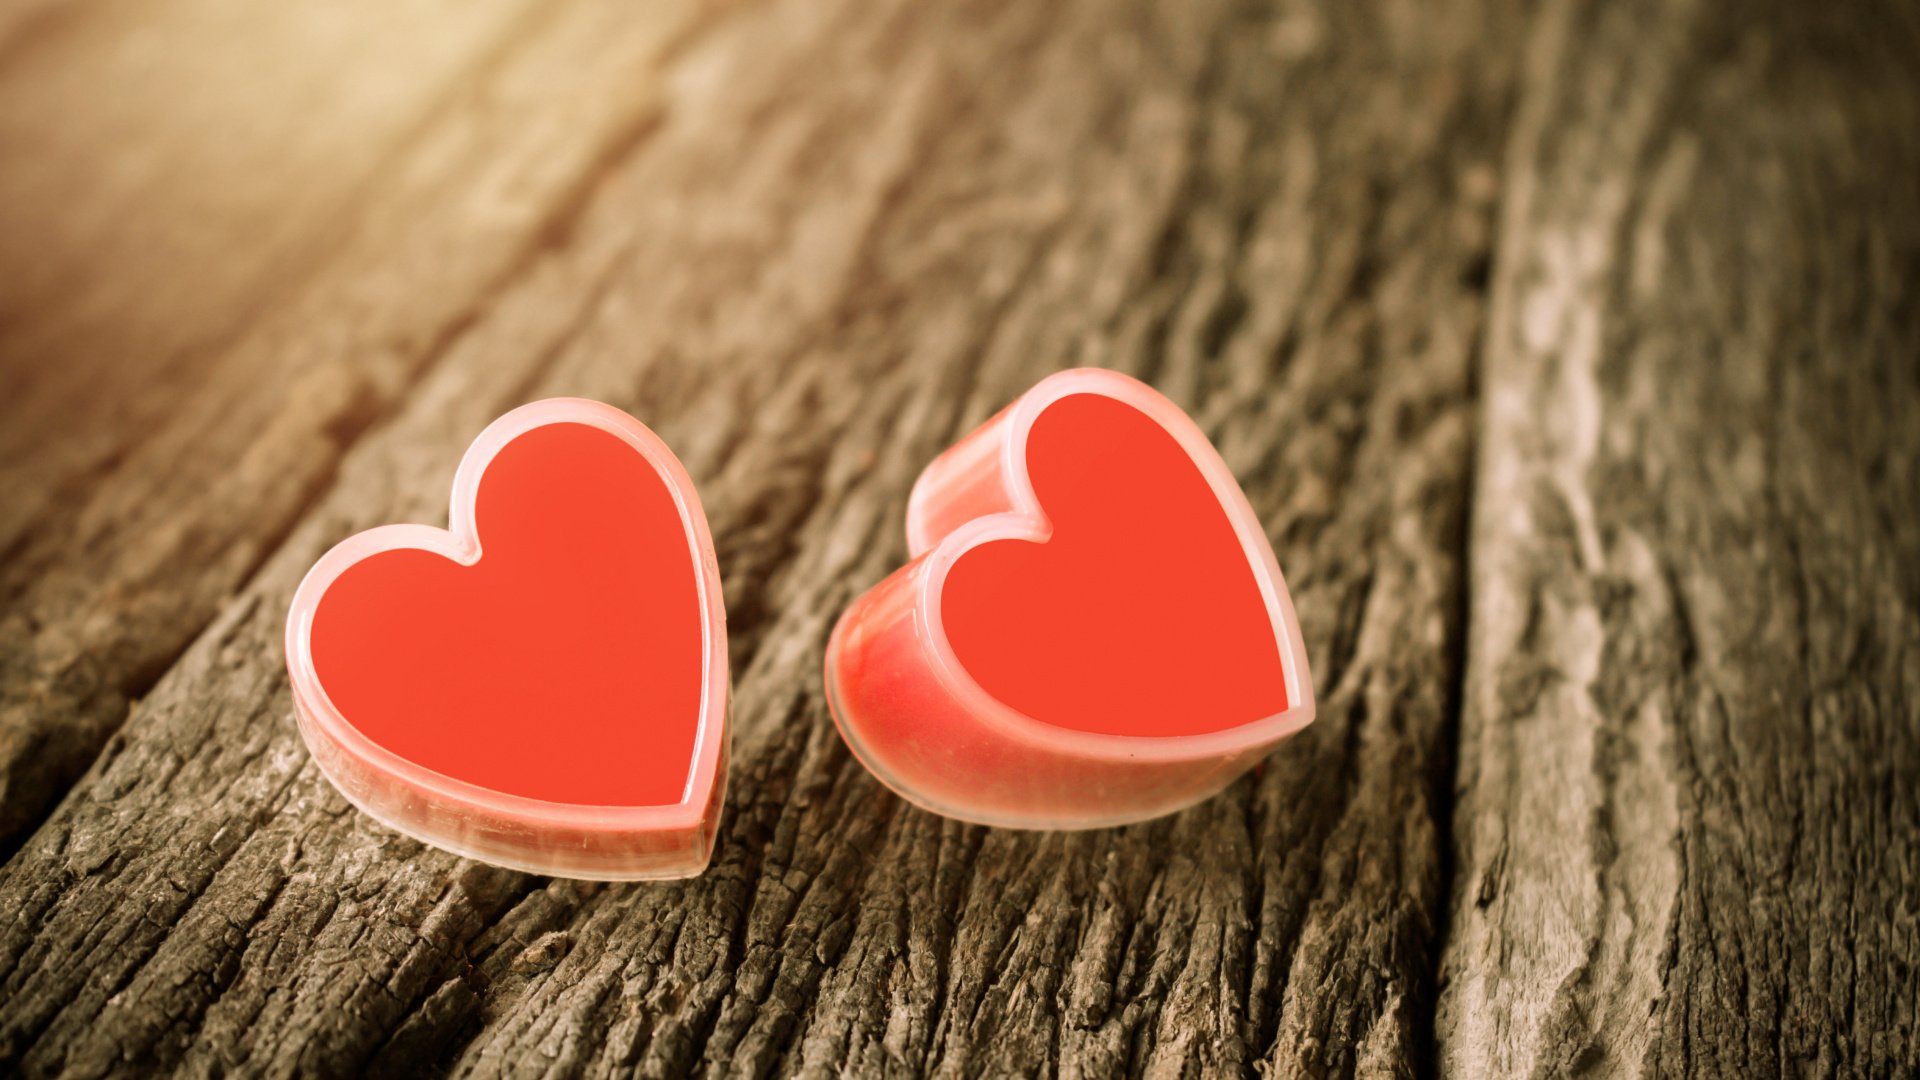 2 Red Heart on Gray Wooden Surface. Wallpaper in 1920x1080 Resolution